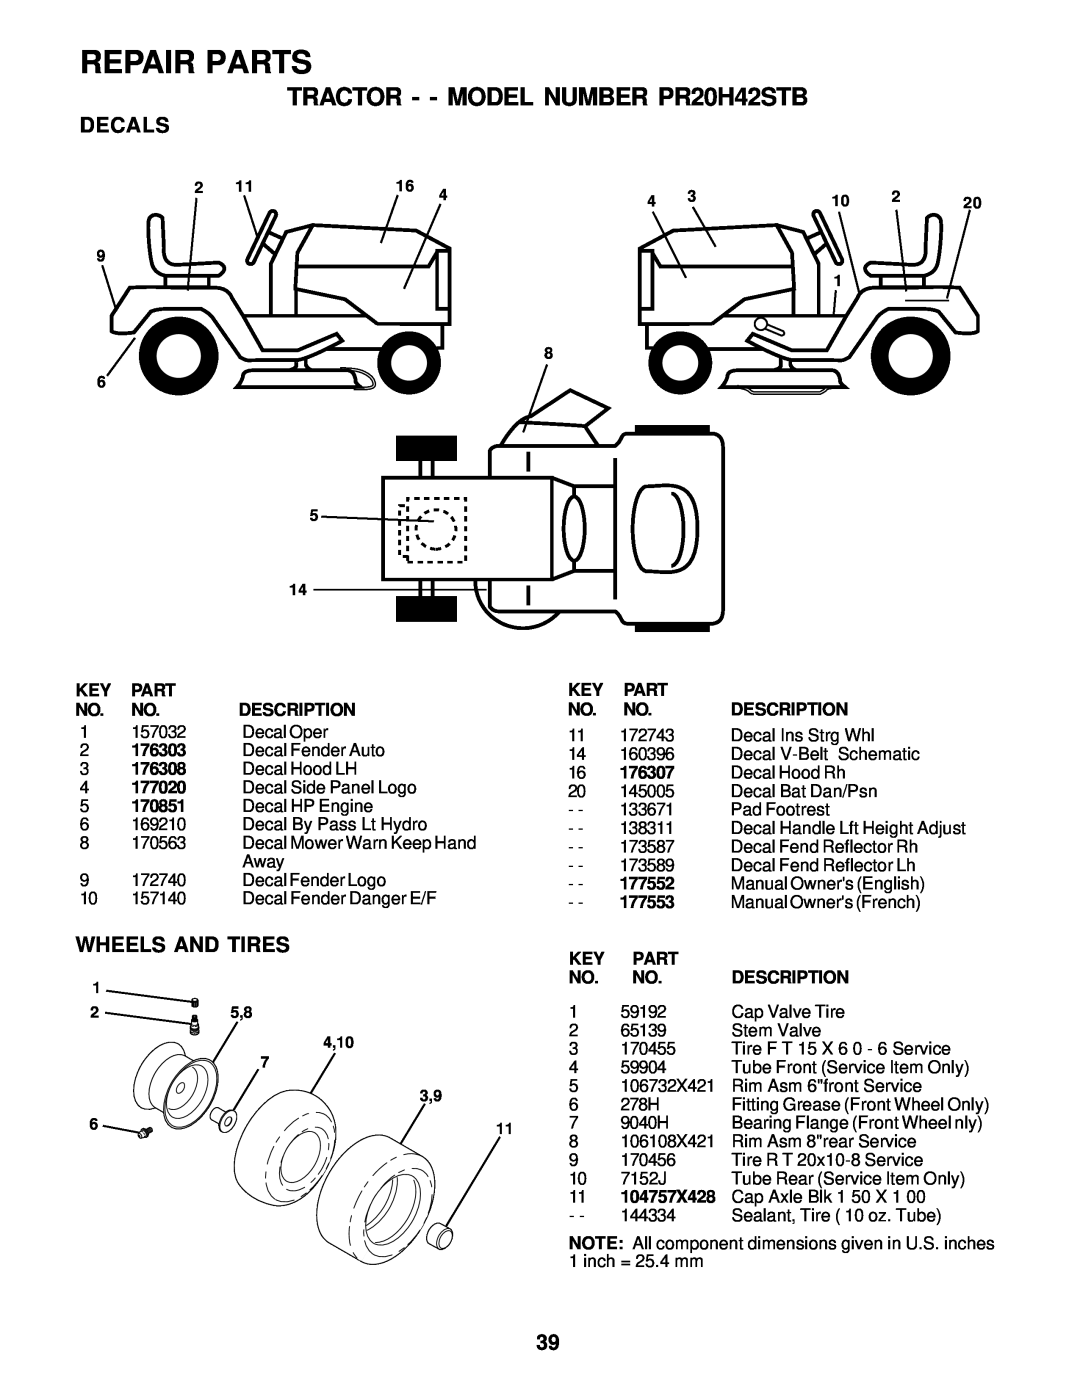 Poulan owner manual Decals, Wheels And Tires, Repair Parts, TRACTOR - - MODEL NUMBER PR20H42STB, 4,10 